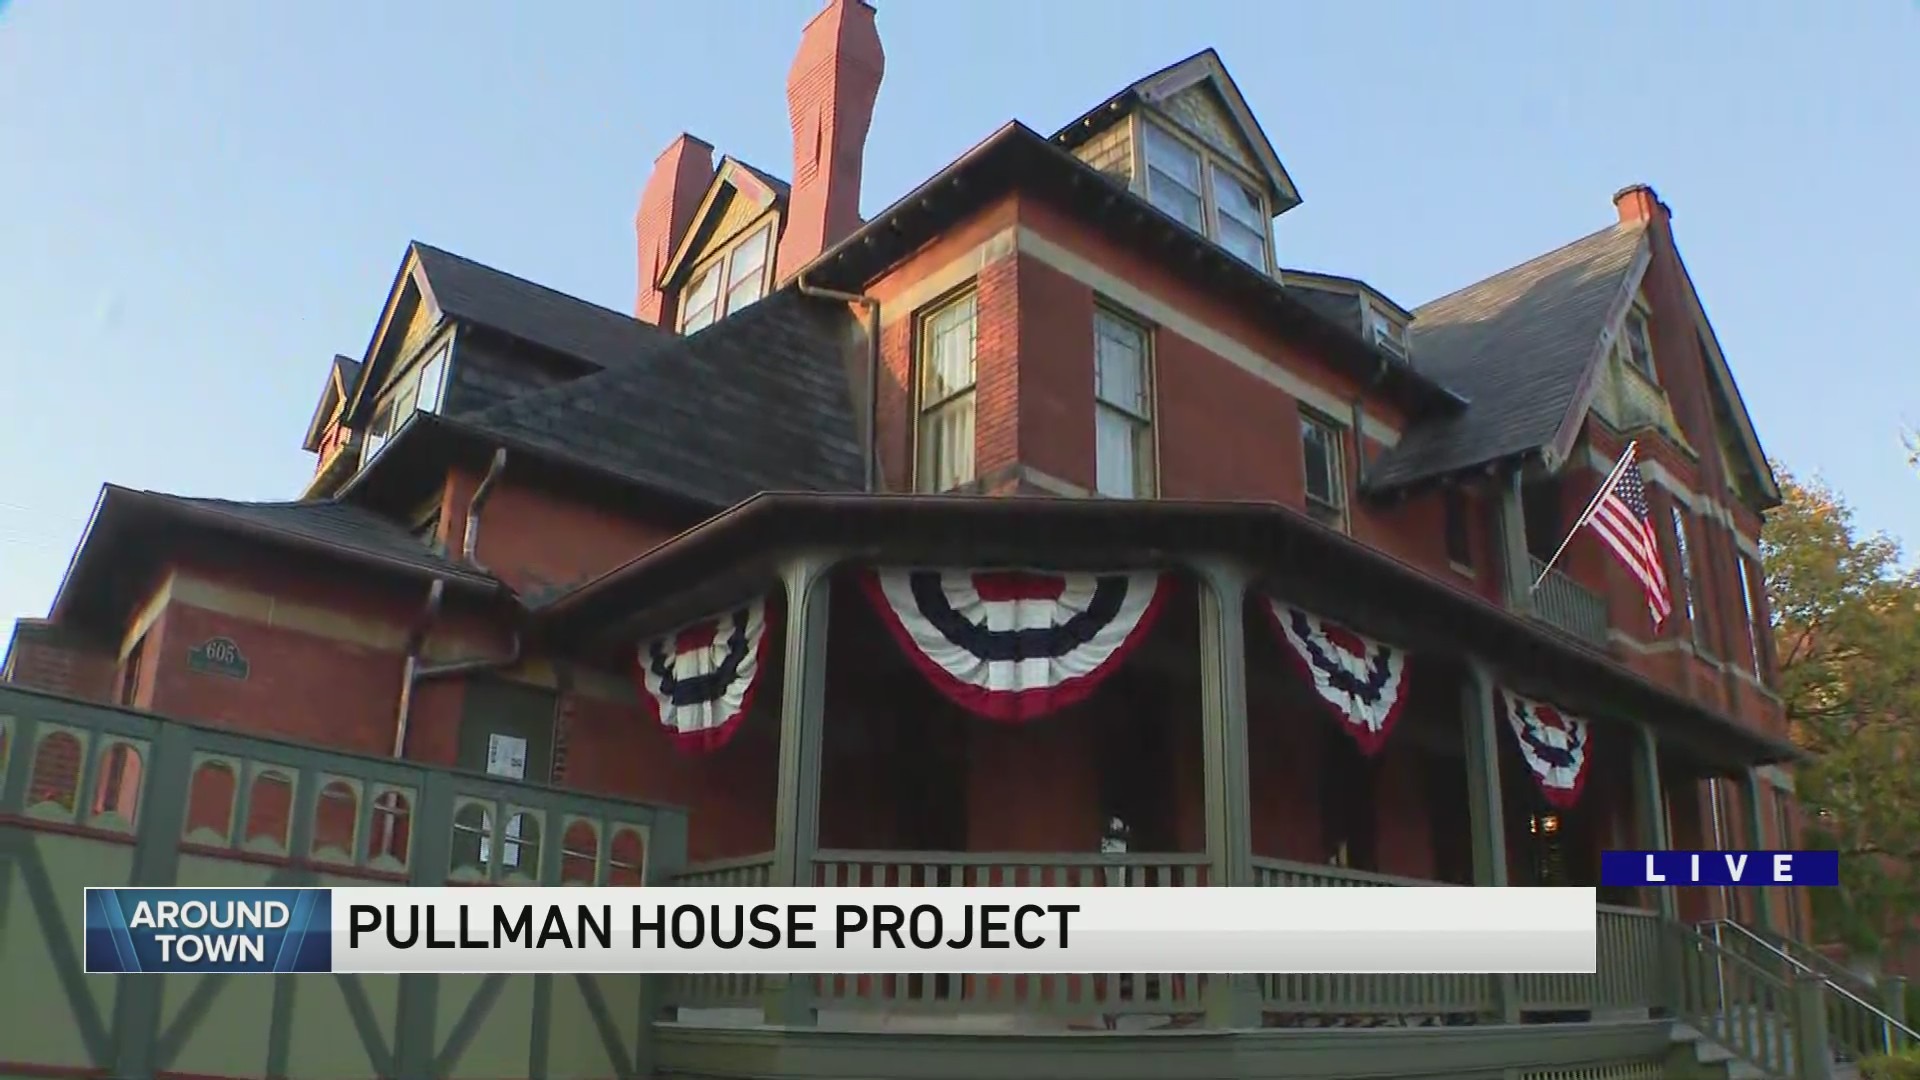 Around Town checks out the Pullman House Project